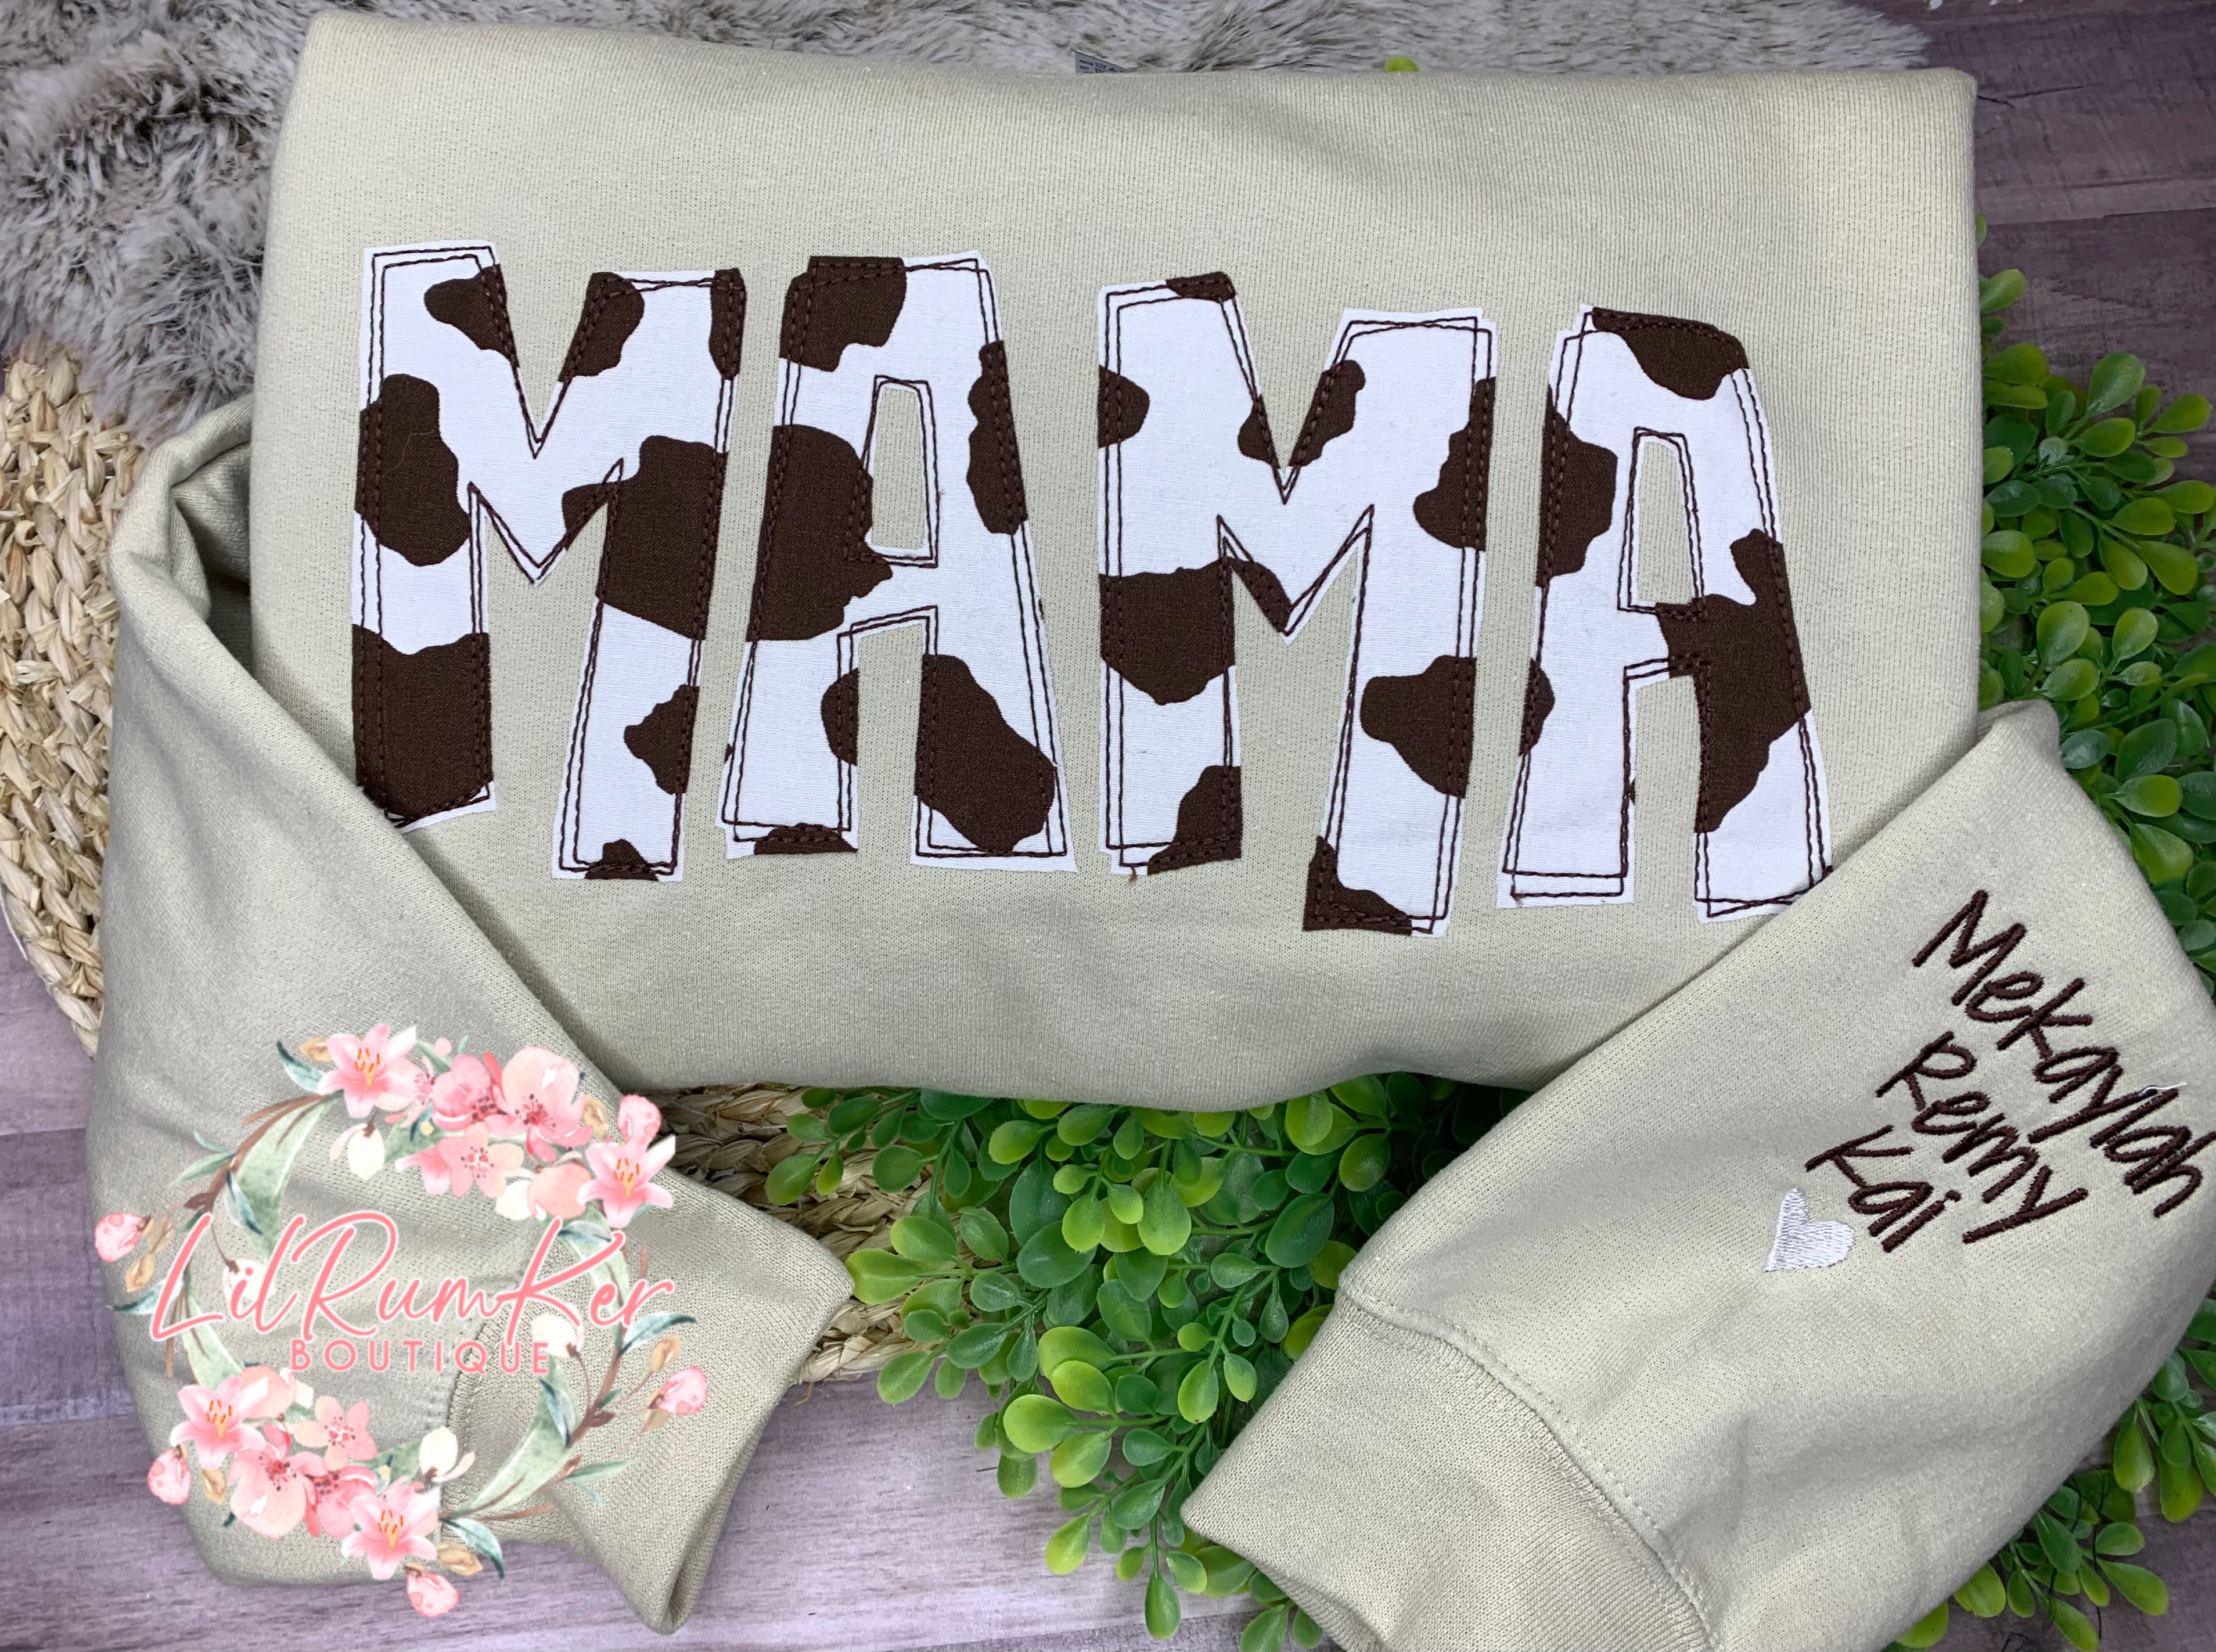 Brown and white cow print on sand sweatshirt with or without names on sleeves